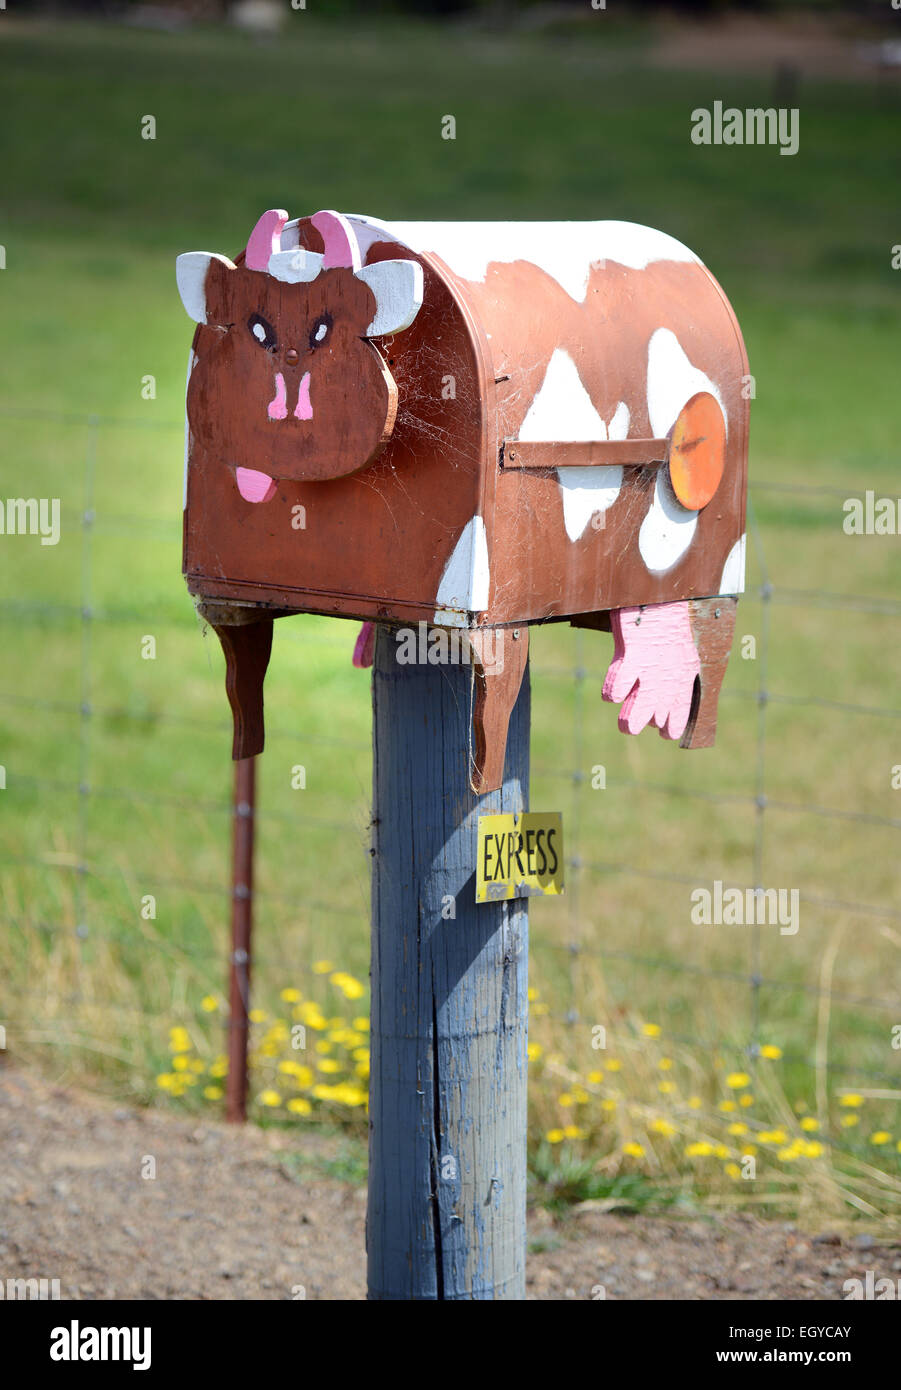 Individually designed mail boxes in the Malborough region, on the South Island of New Zealand. Stock Photo